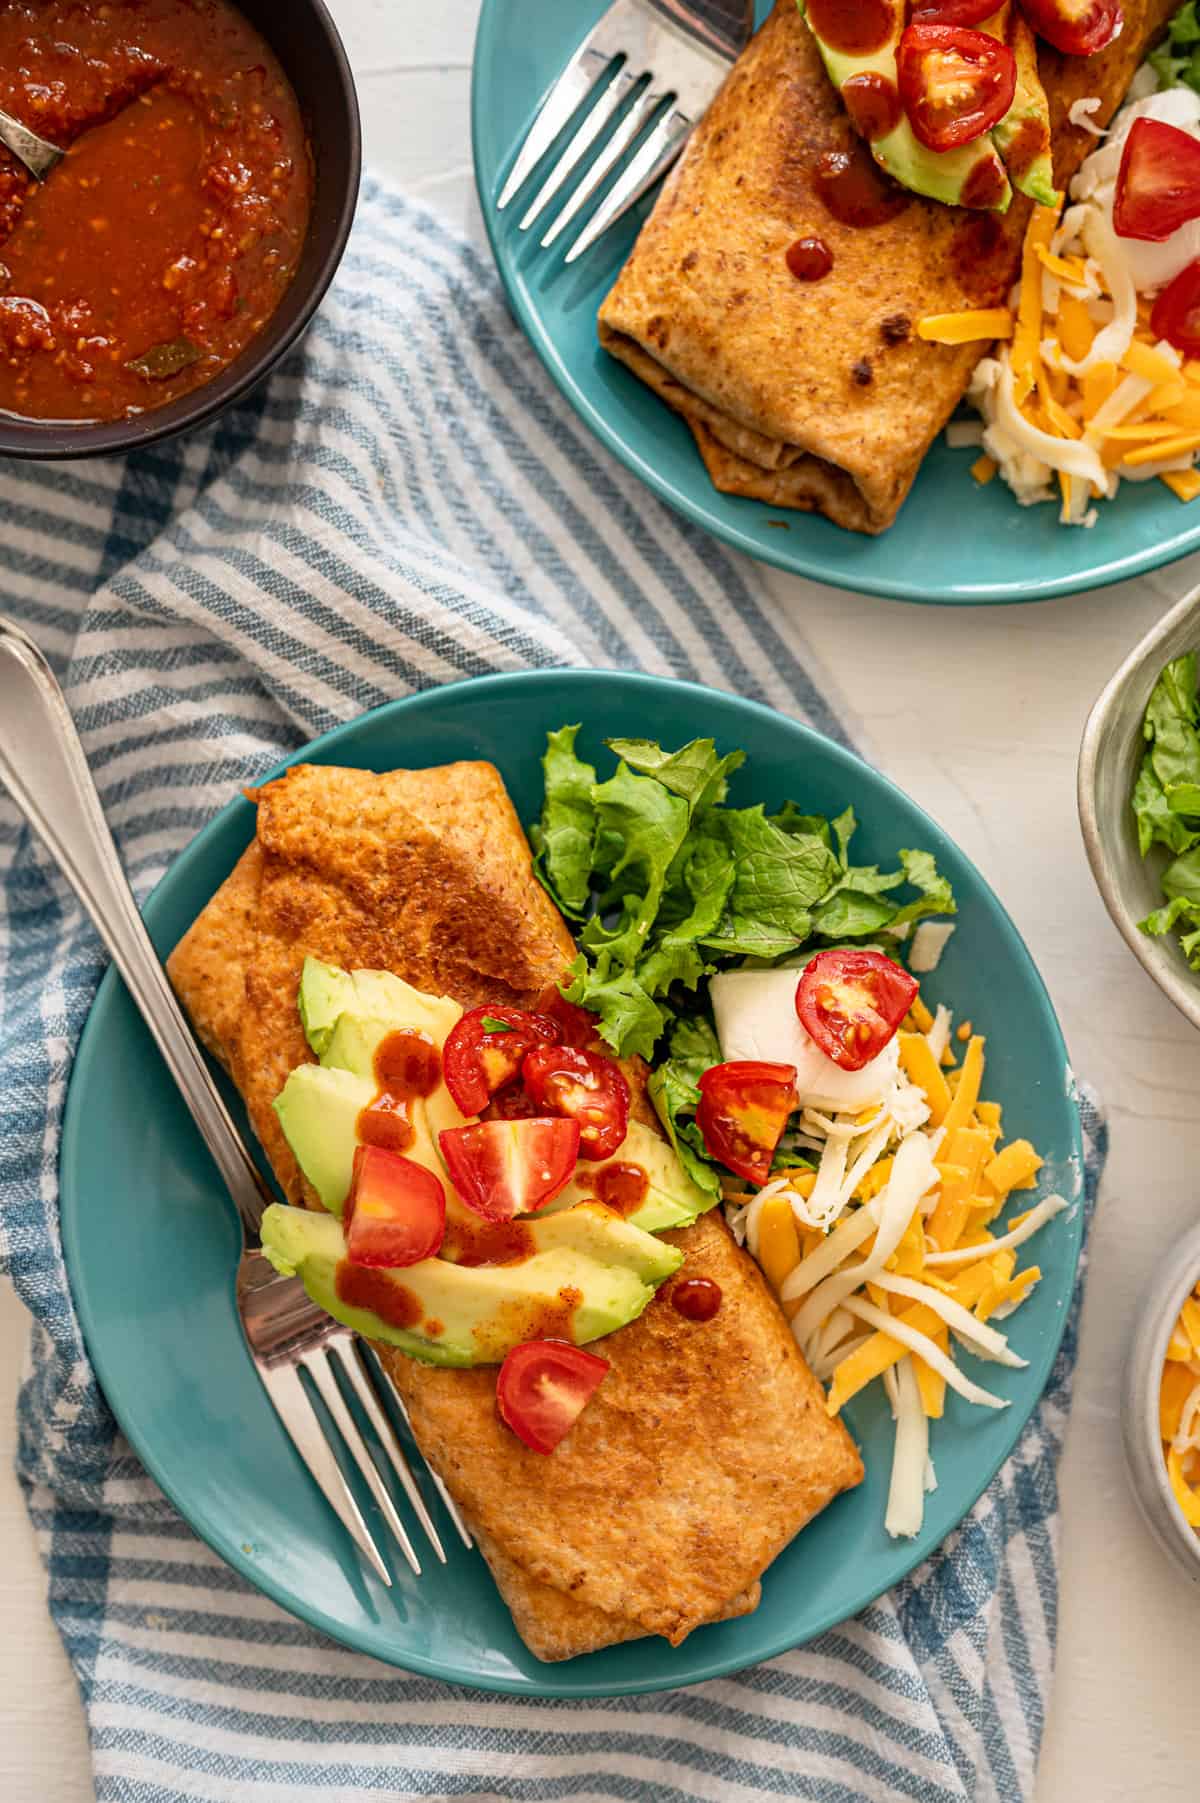 A chicken chimichanga on an aqua plate with avocado slices and chopped cherry tomatoes on top.